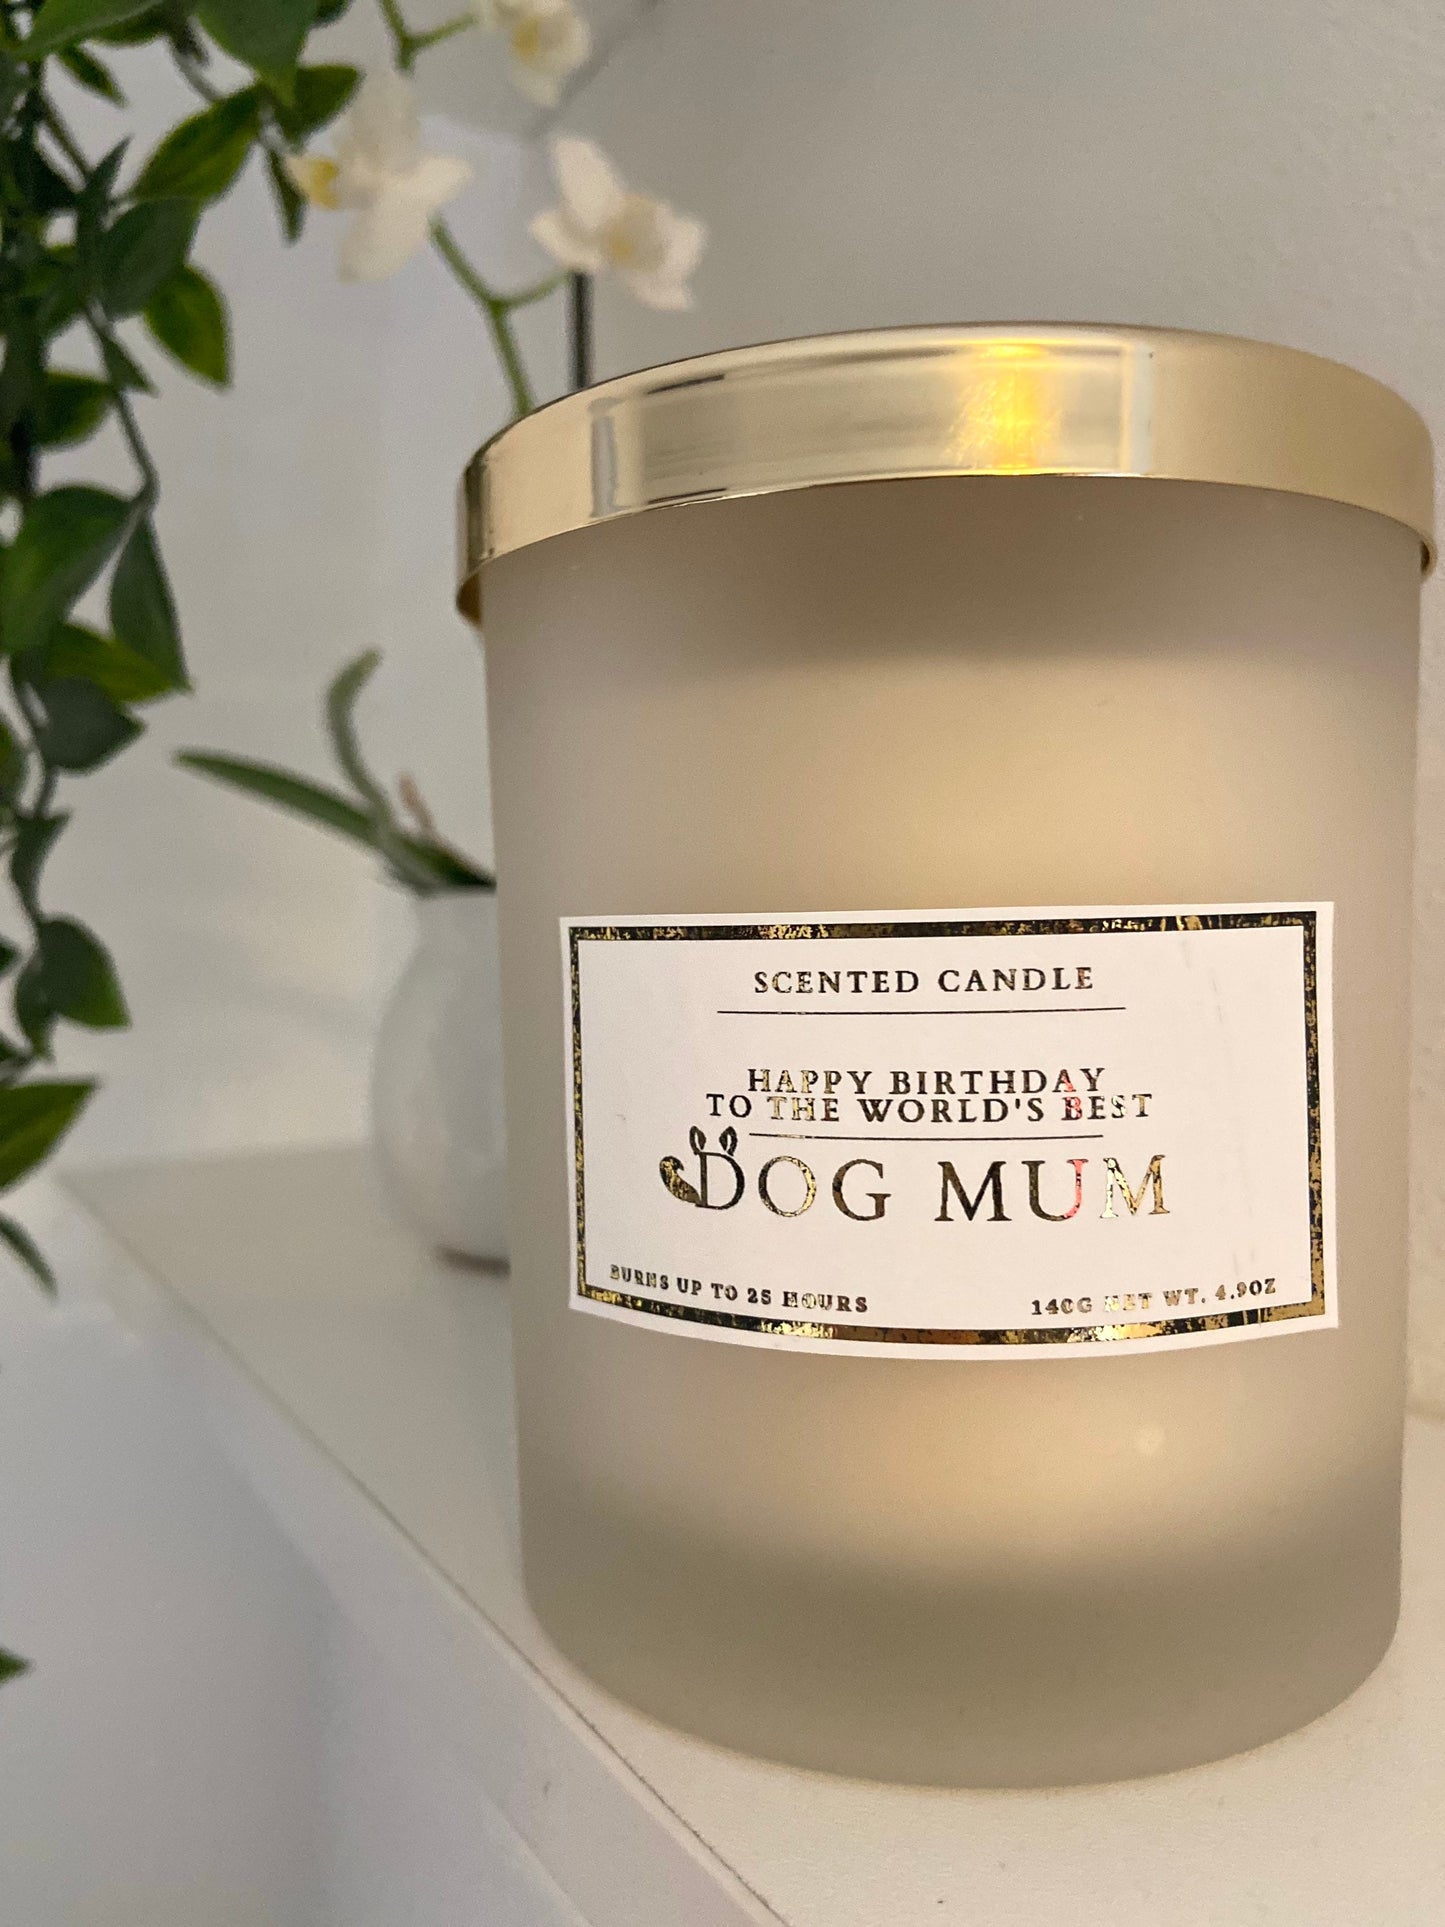 Happy Birthday To The World’s Best Dog Mum Candle